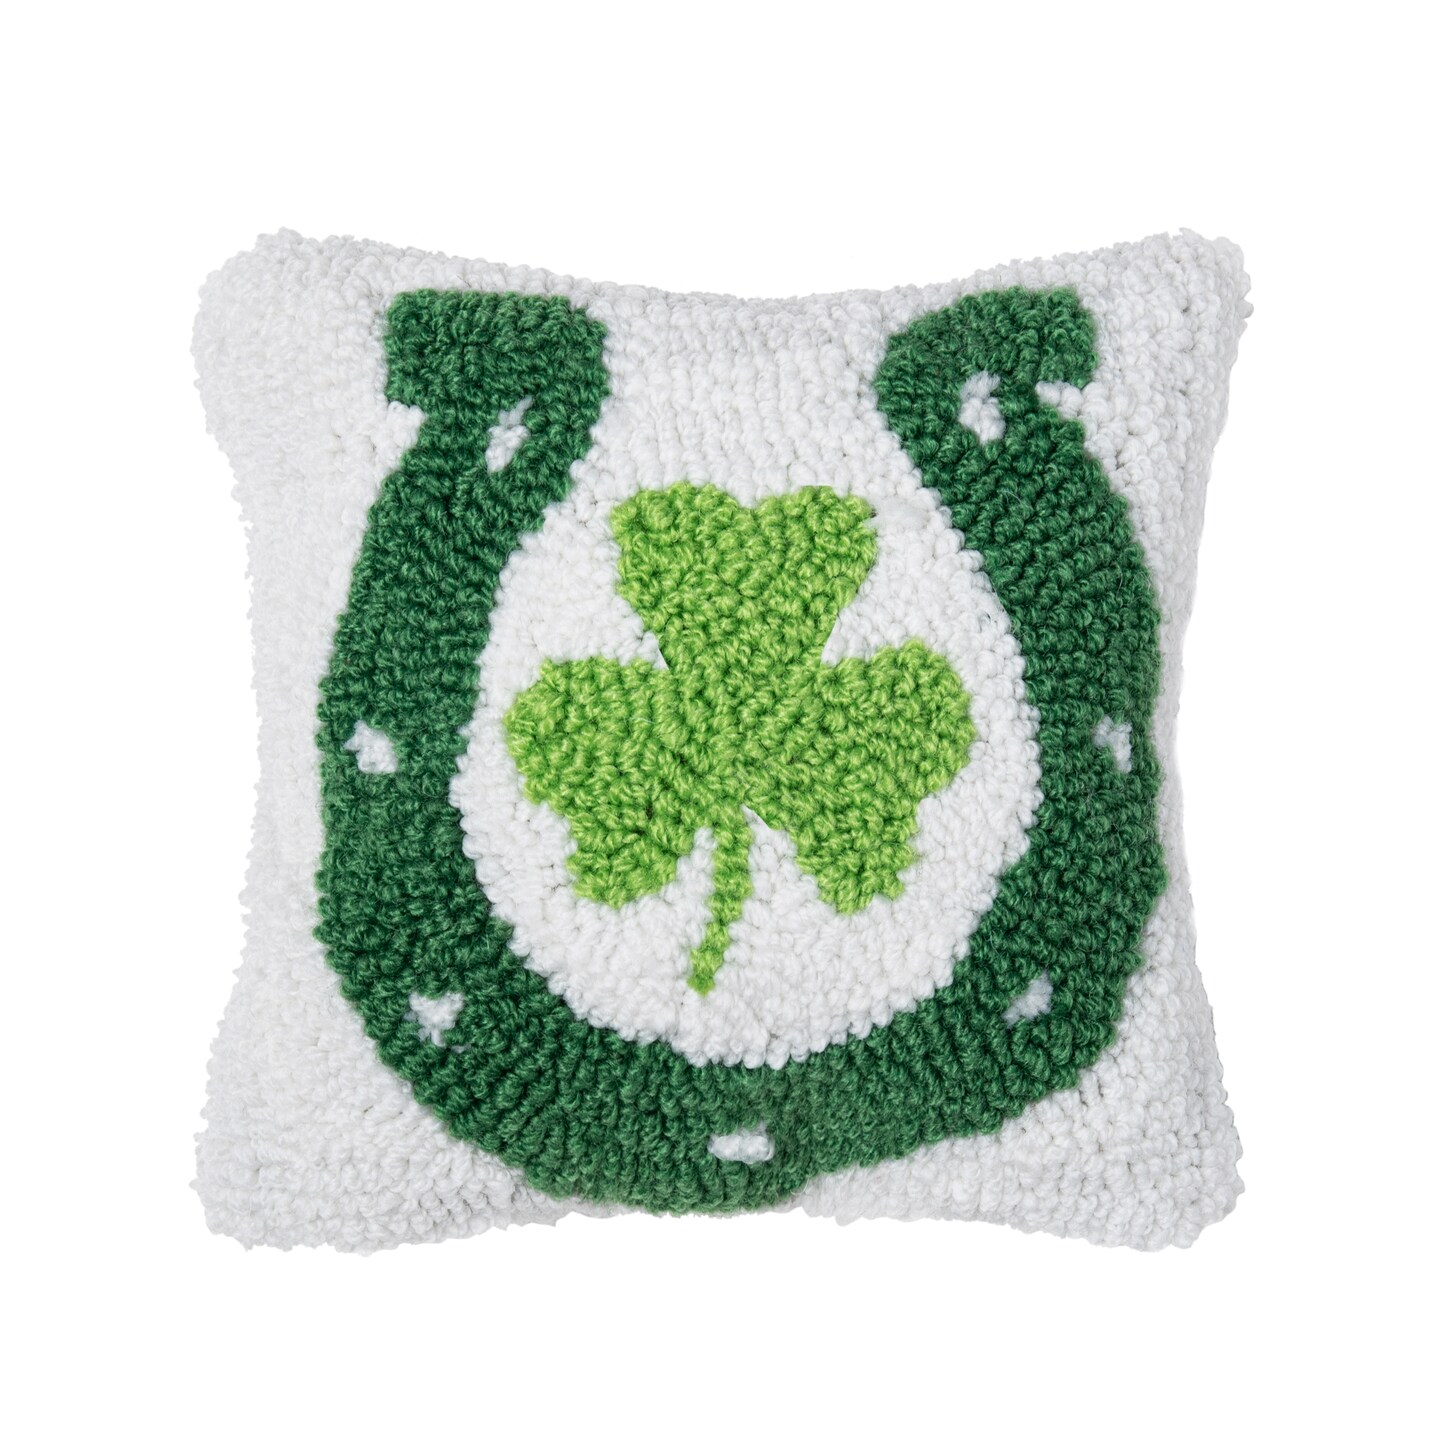 8 x 8 Horse Shoe Clover St. Patrick's Day Hooked Pillow